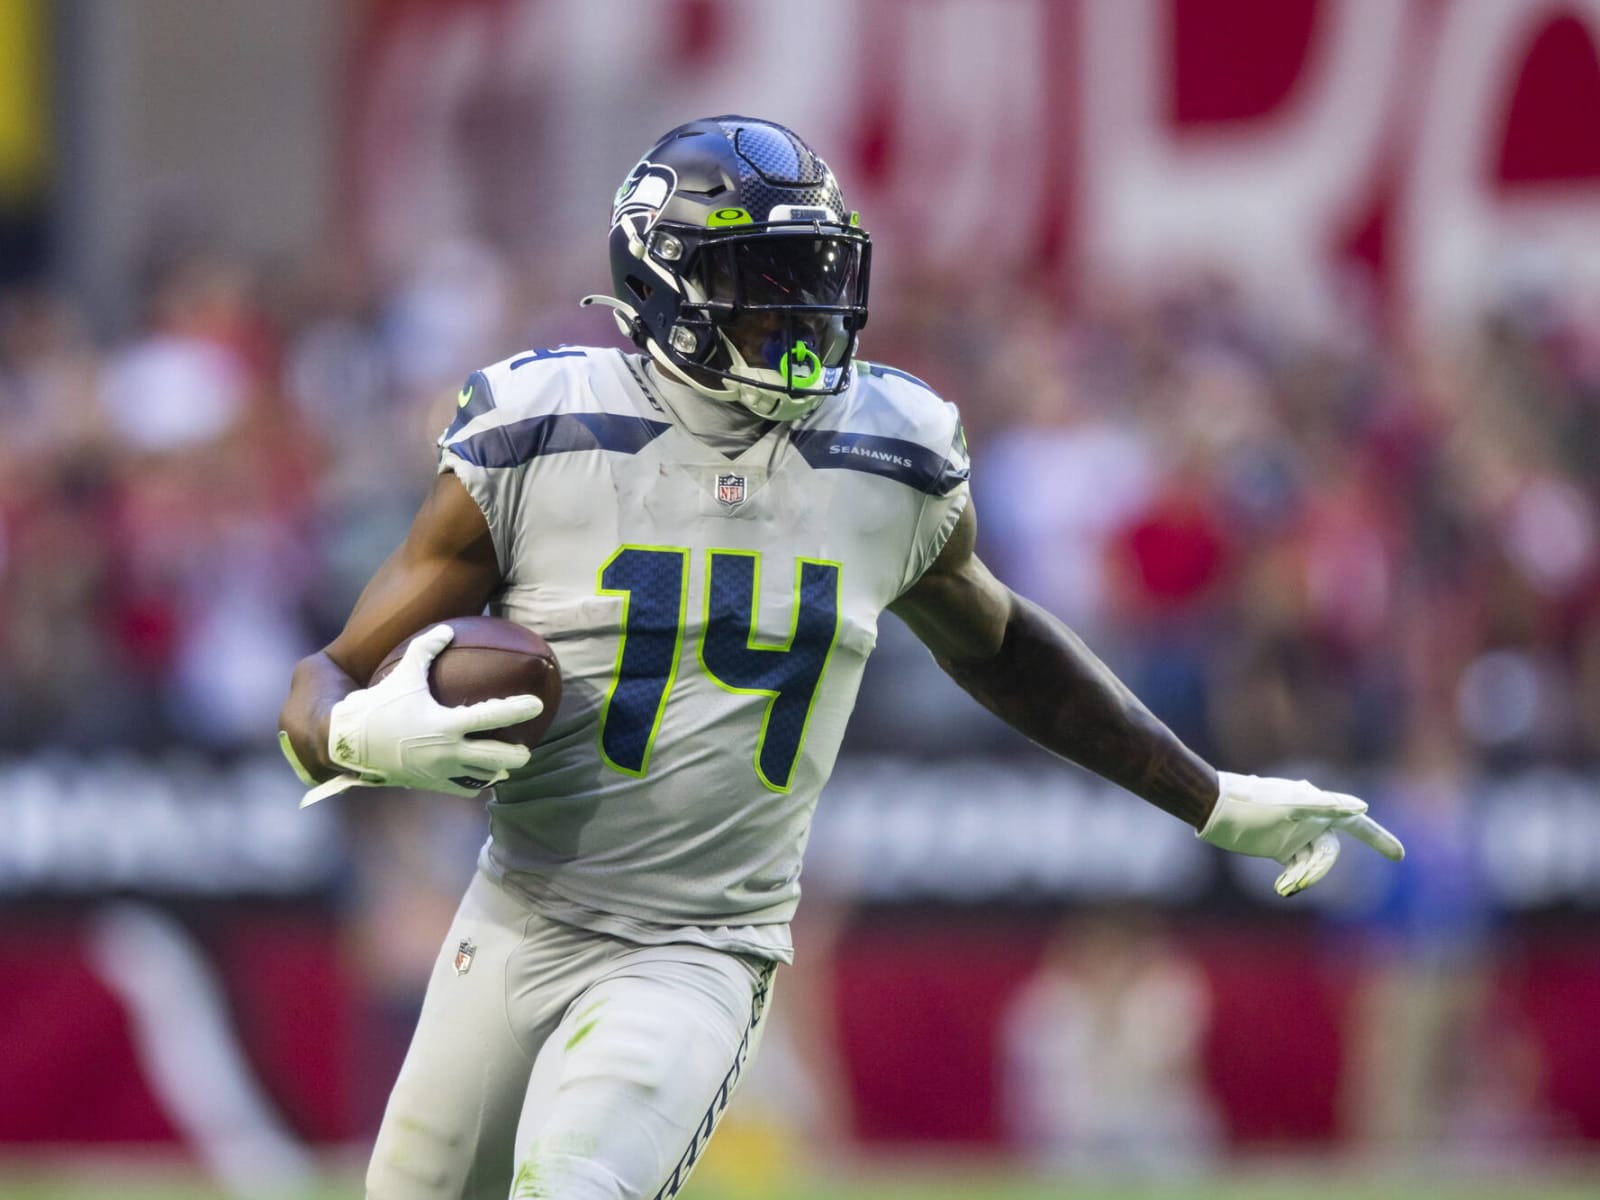 Bob Condotta on X: DK Metcalf's page in the Seahawks media notes